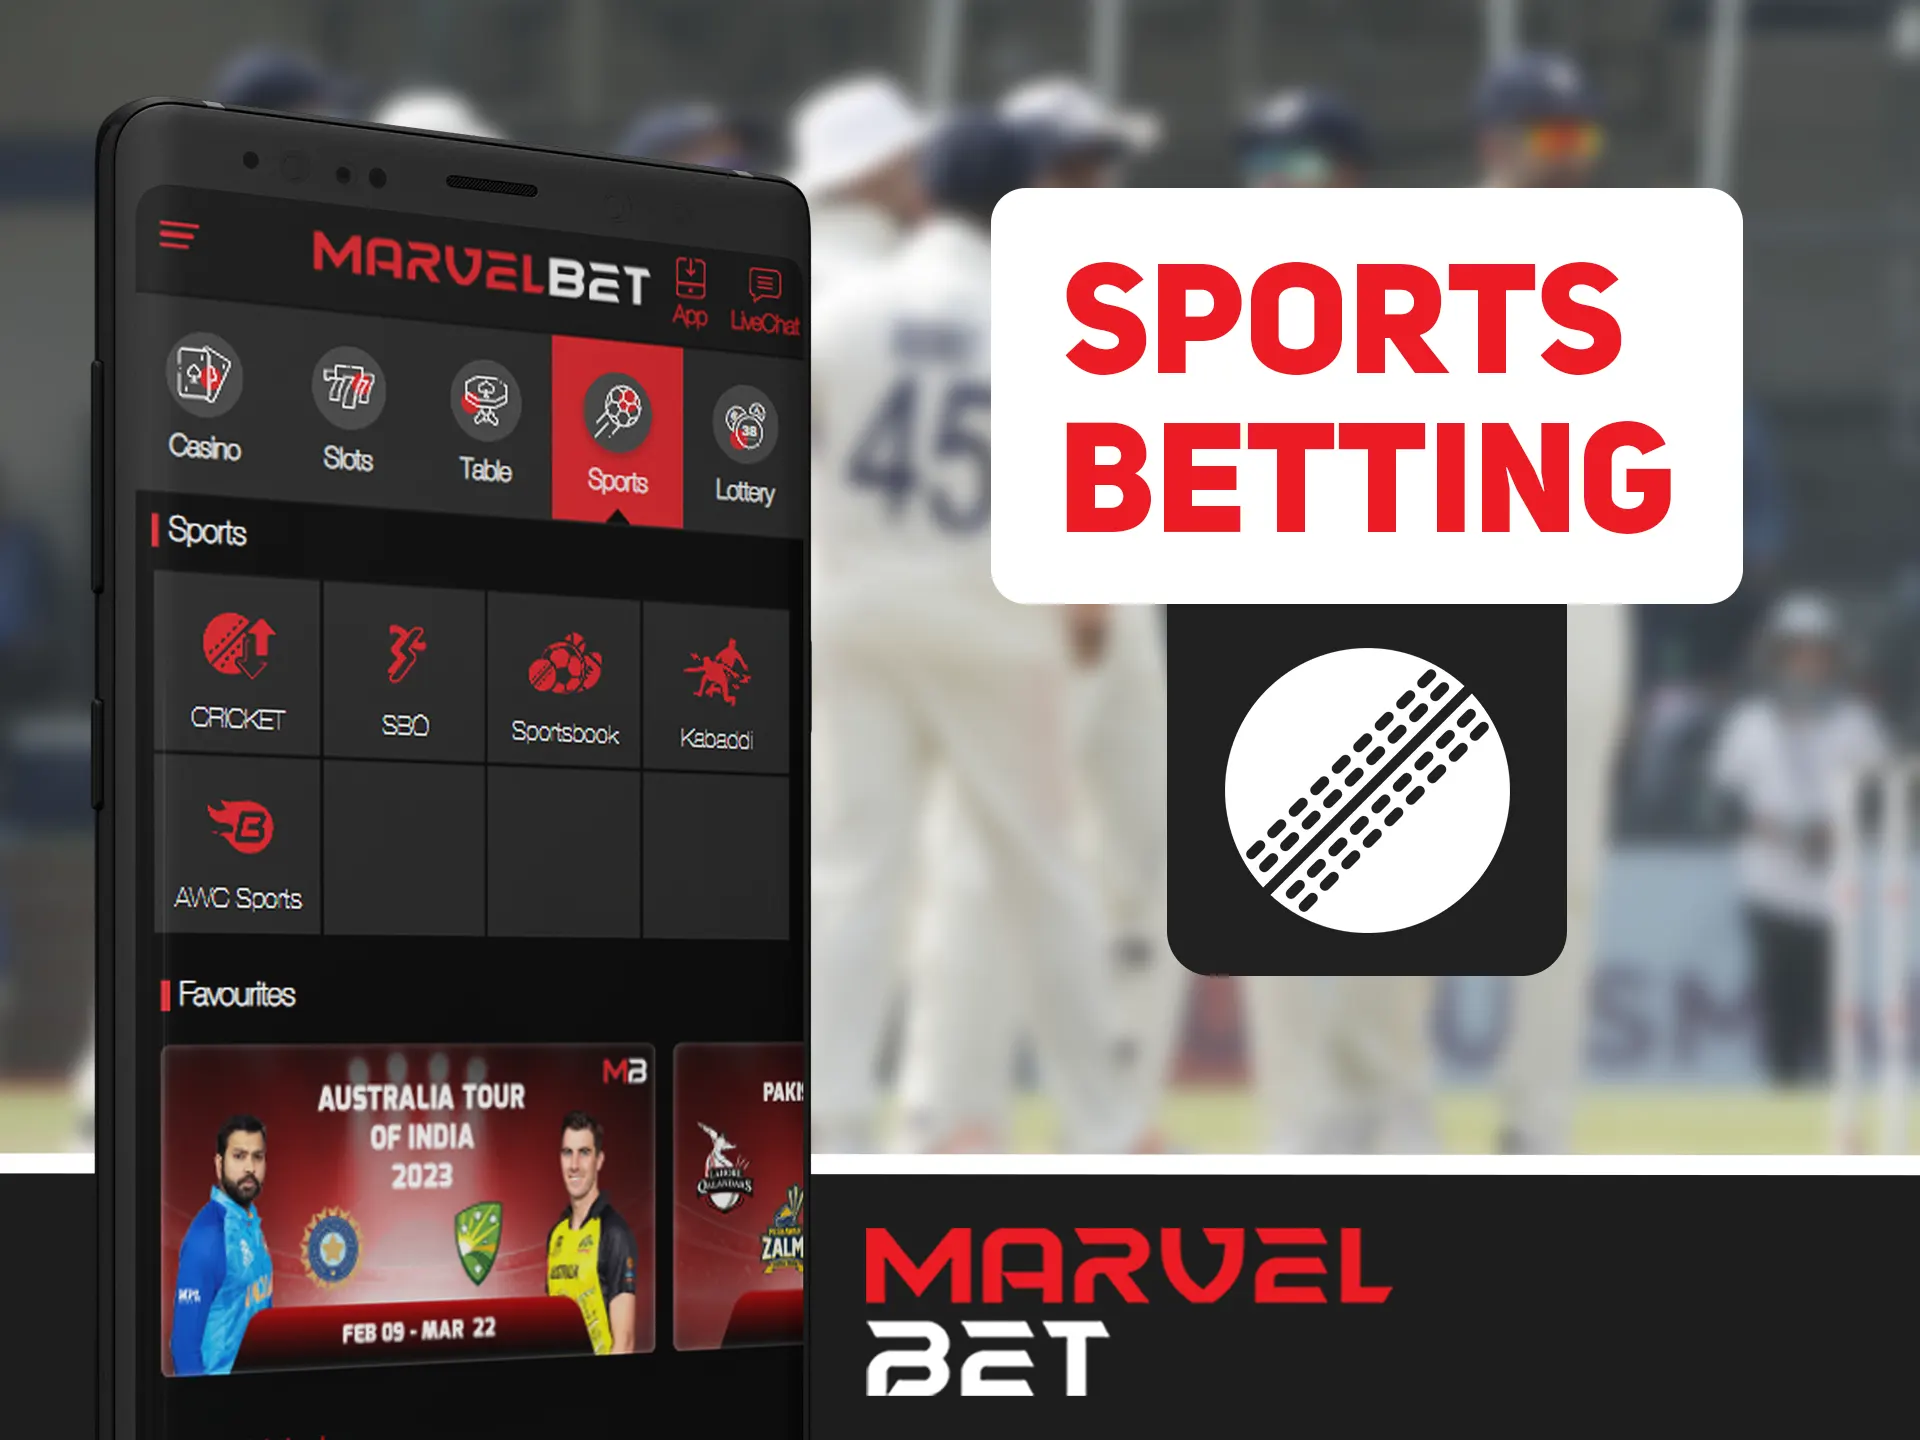 Bet on any kind of sports in Marvelbet app.